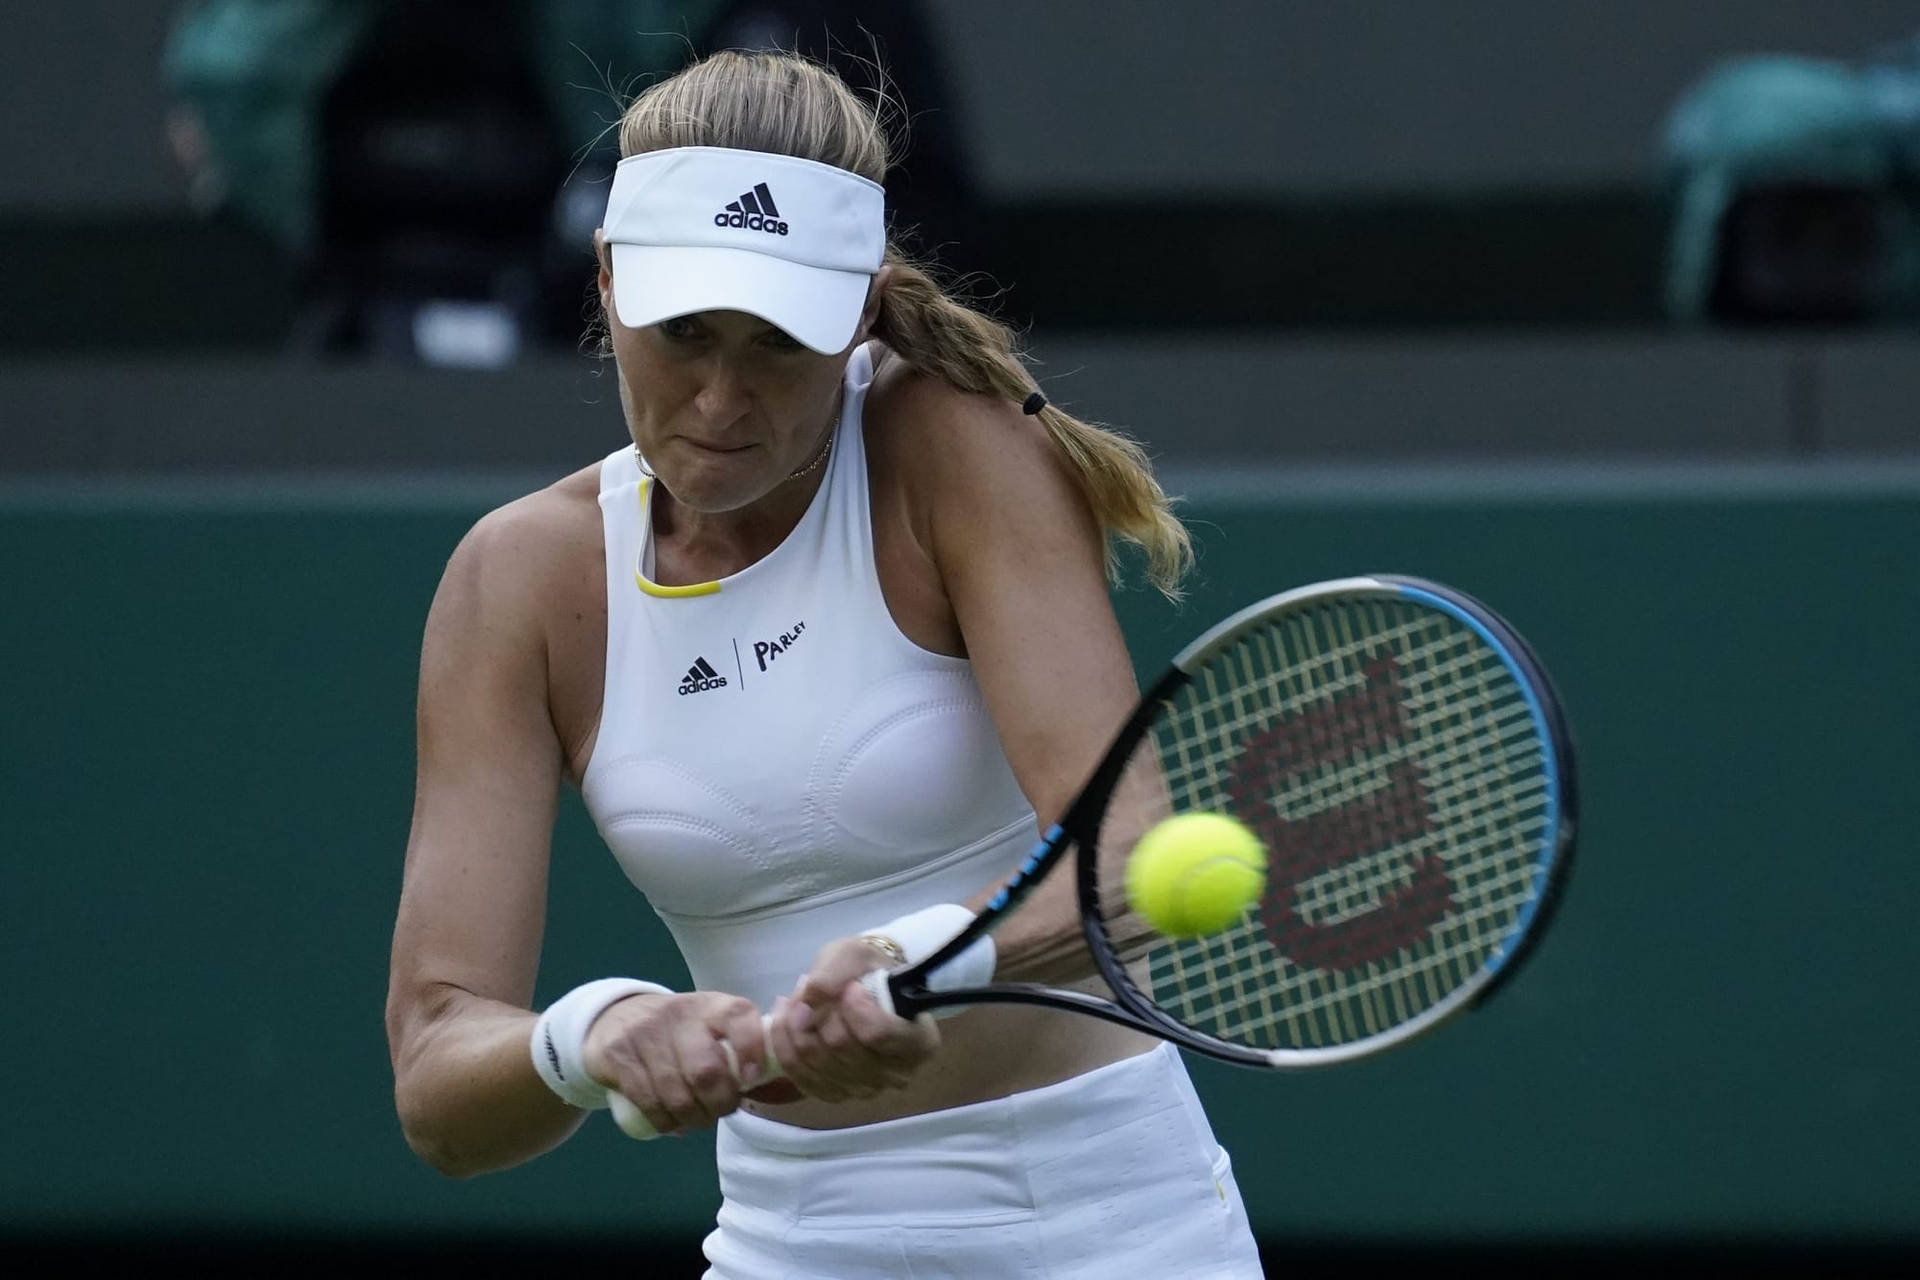 Kristina Mladenovic In All-white Outfit Wallpaper